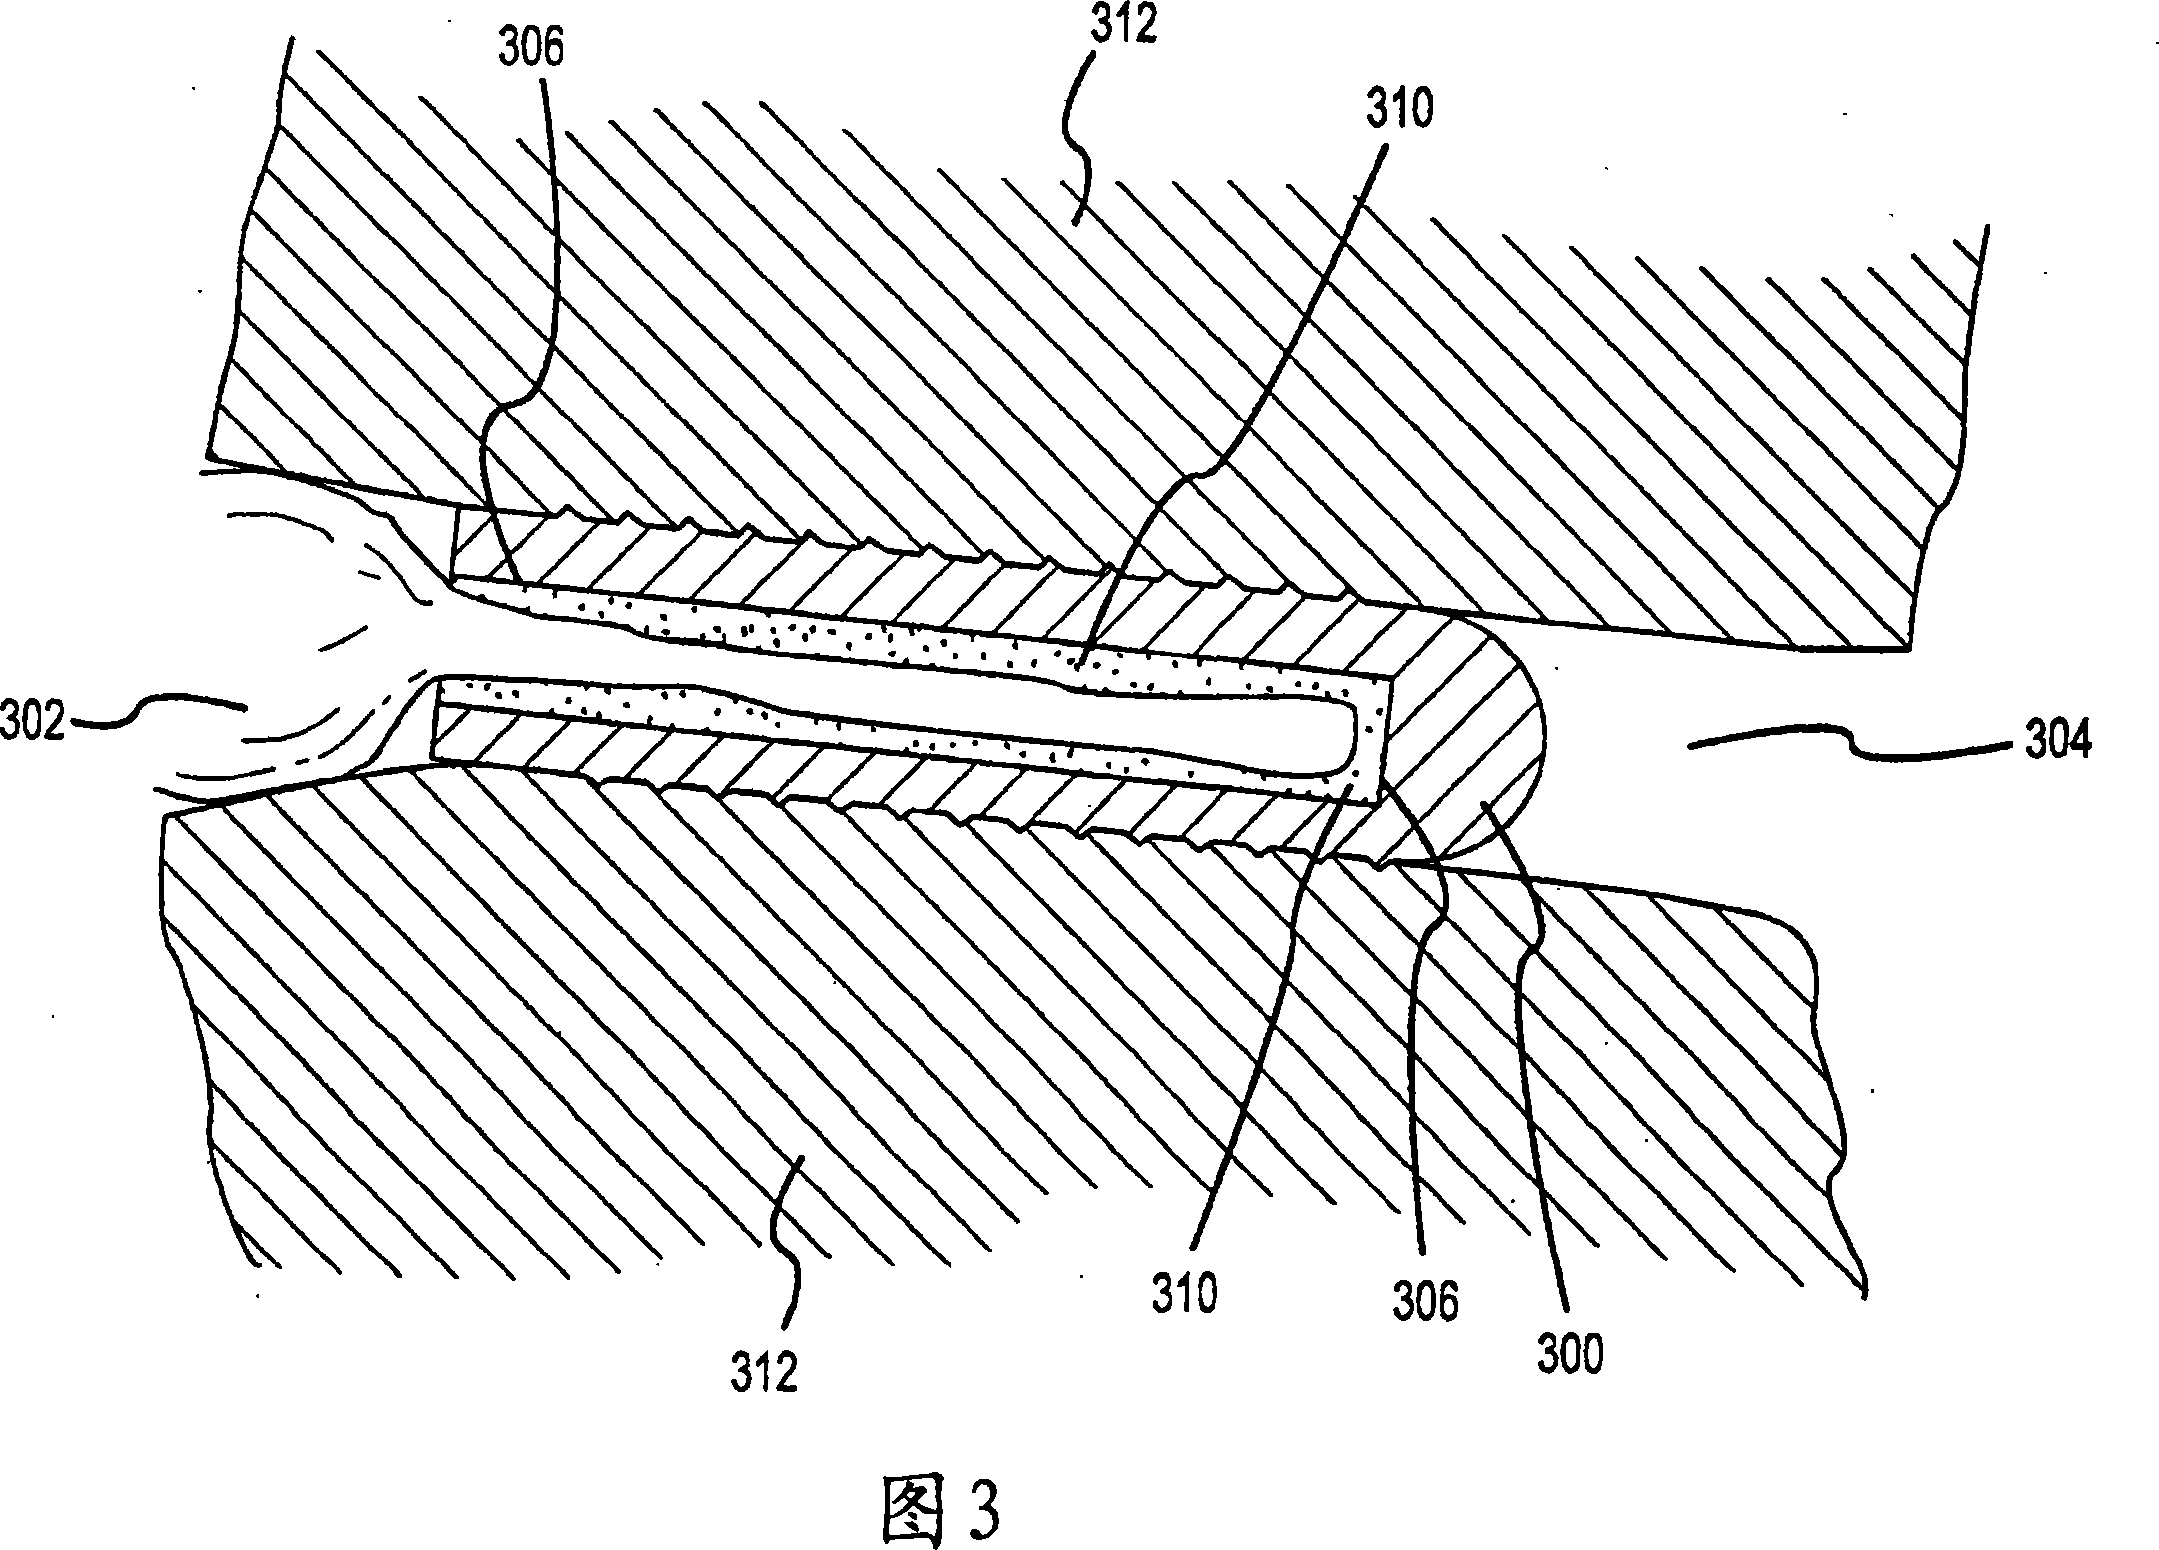 A graft fixation device and method